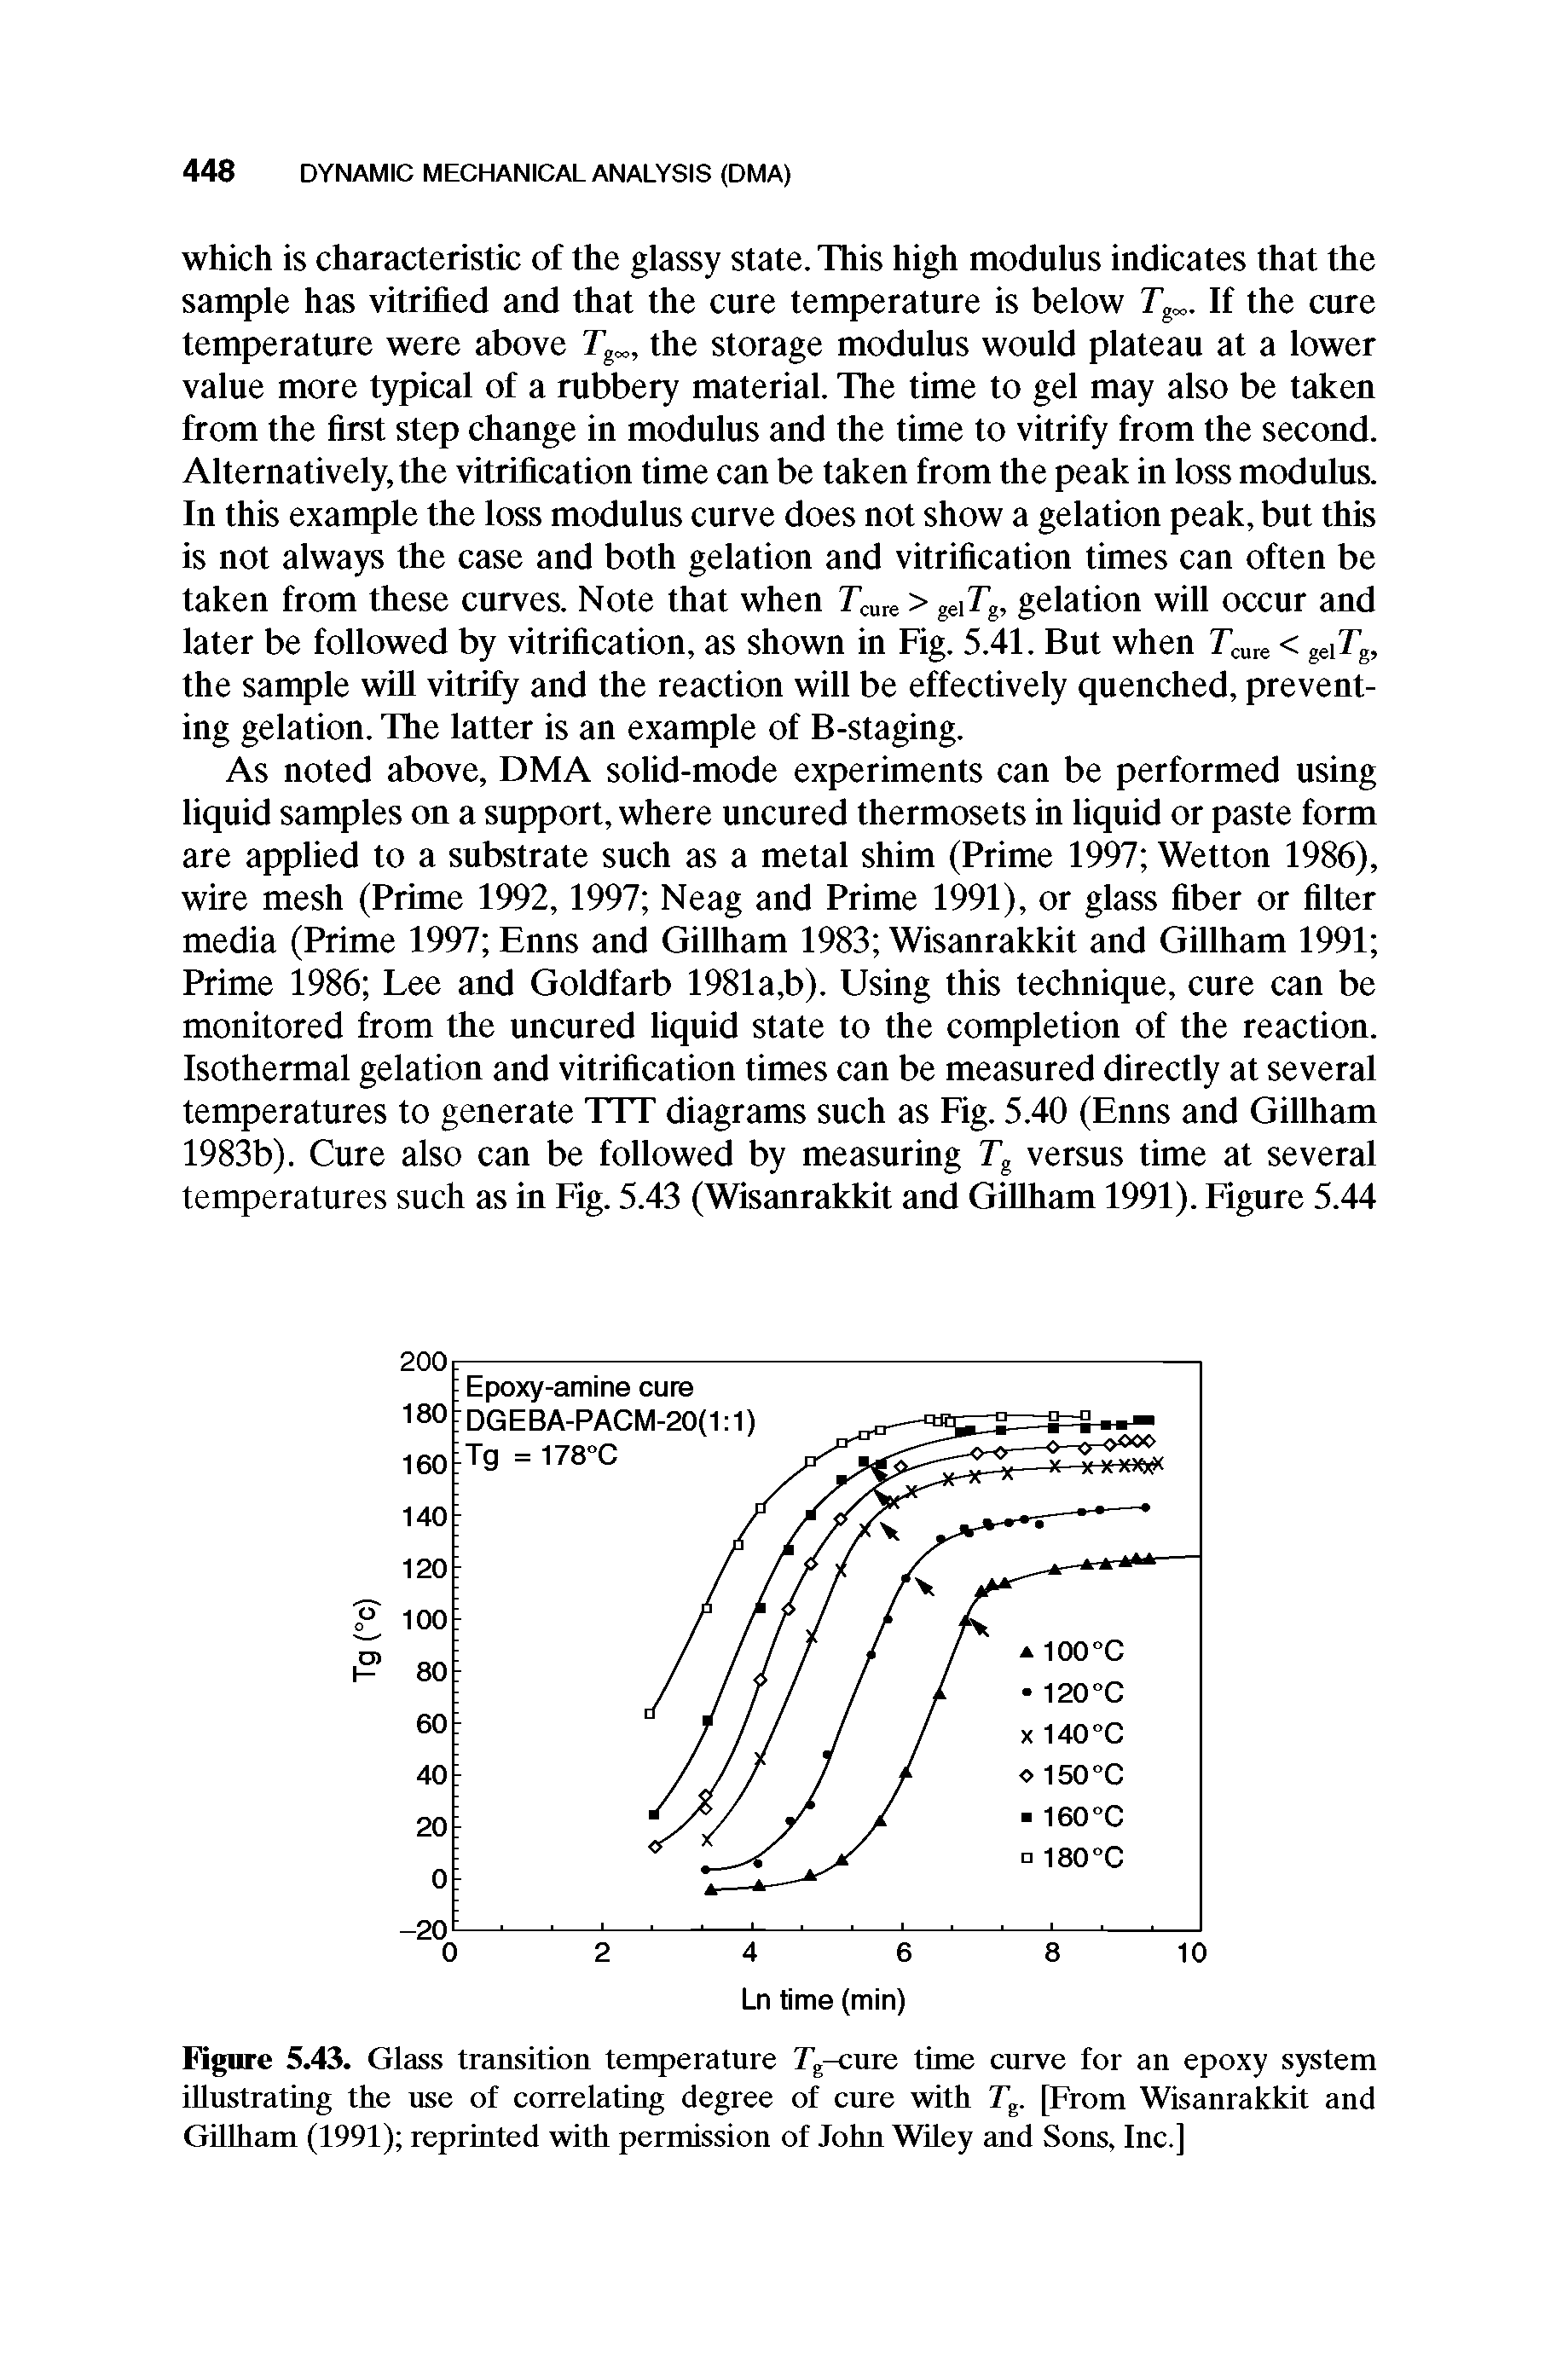 Figure 5.43. Glass transition temperature Tg-cure time curve for an epoxy system illustrating the use of correlating degree of cure with Tg. [From Wisanrakkit and Gillham (1991) reprinted with permission of John Wiley and Sons, Inc.]...